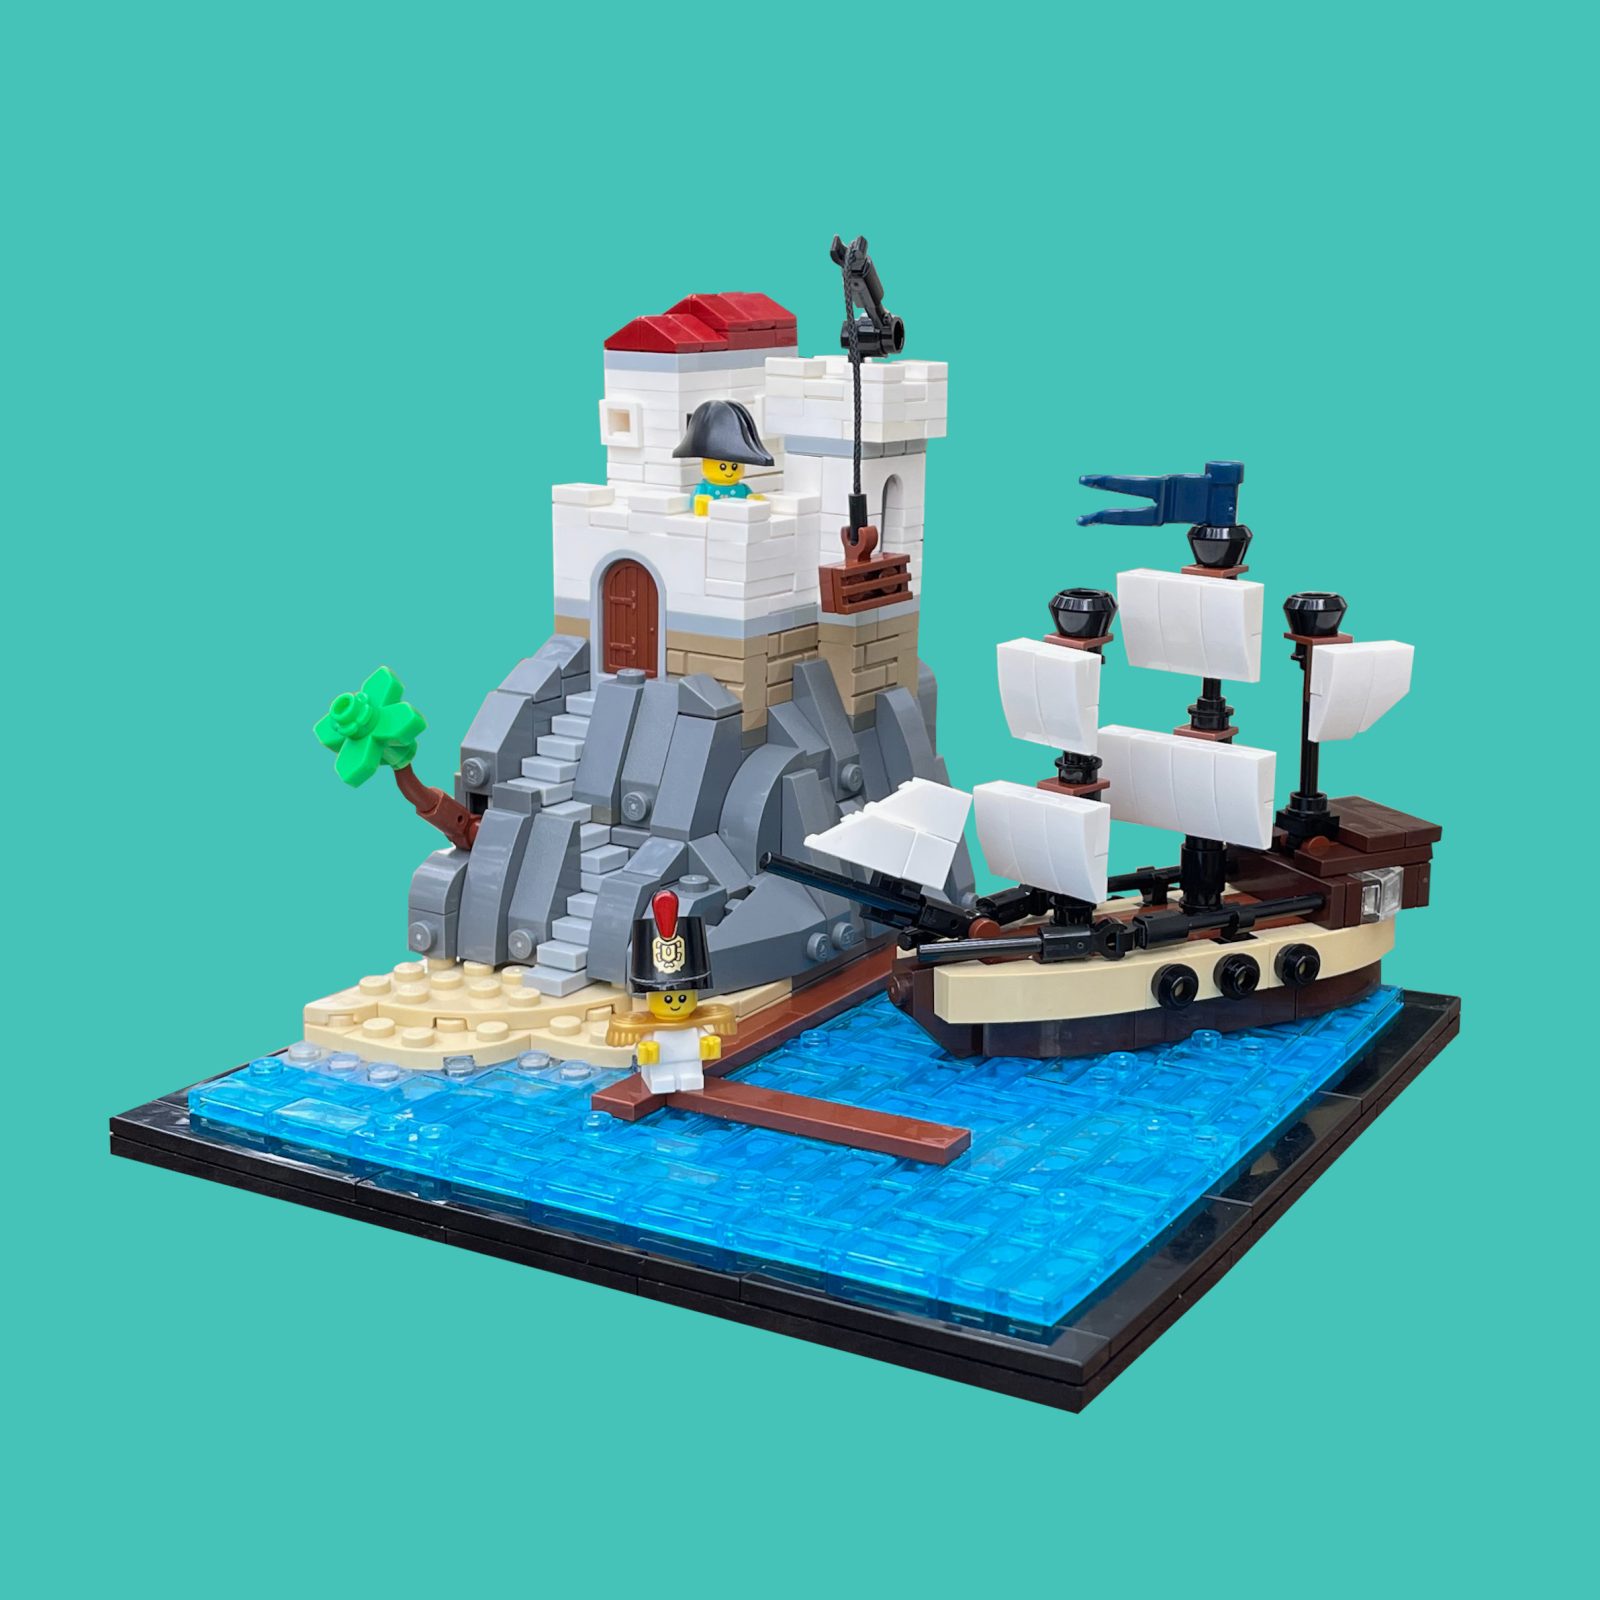 Featured Image for “Tiny Trailblazers: Imperial Port” by Kev.the.Builder